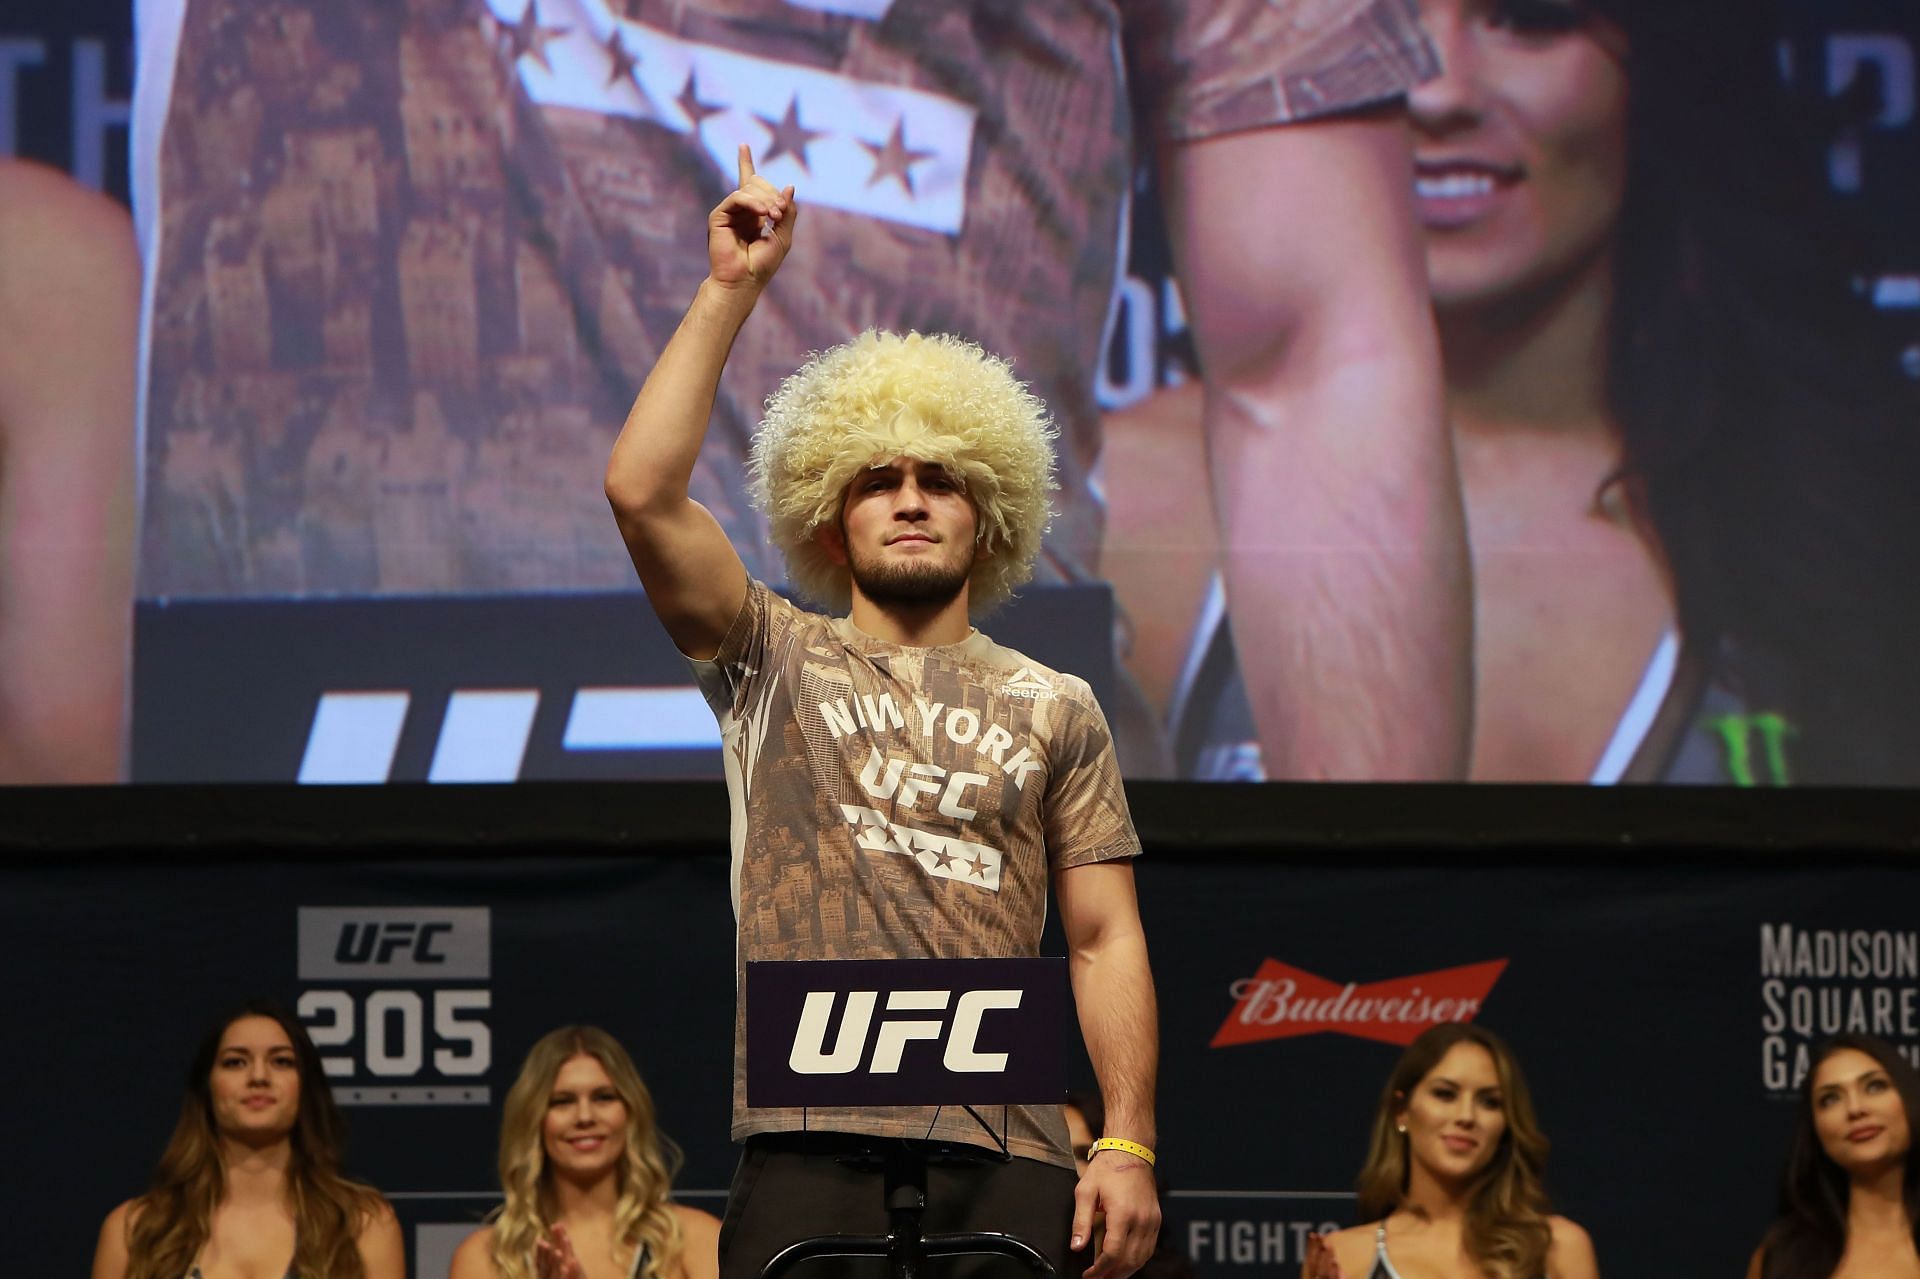 UFC 205: Weigh-ins Khabib Nurmagomedov on the scales (Image courtesy of Getty)